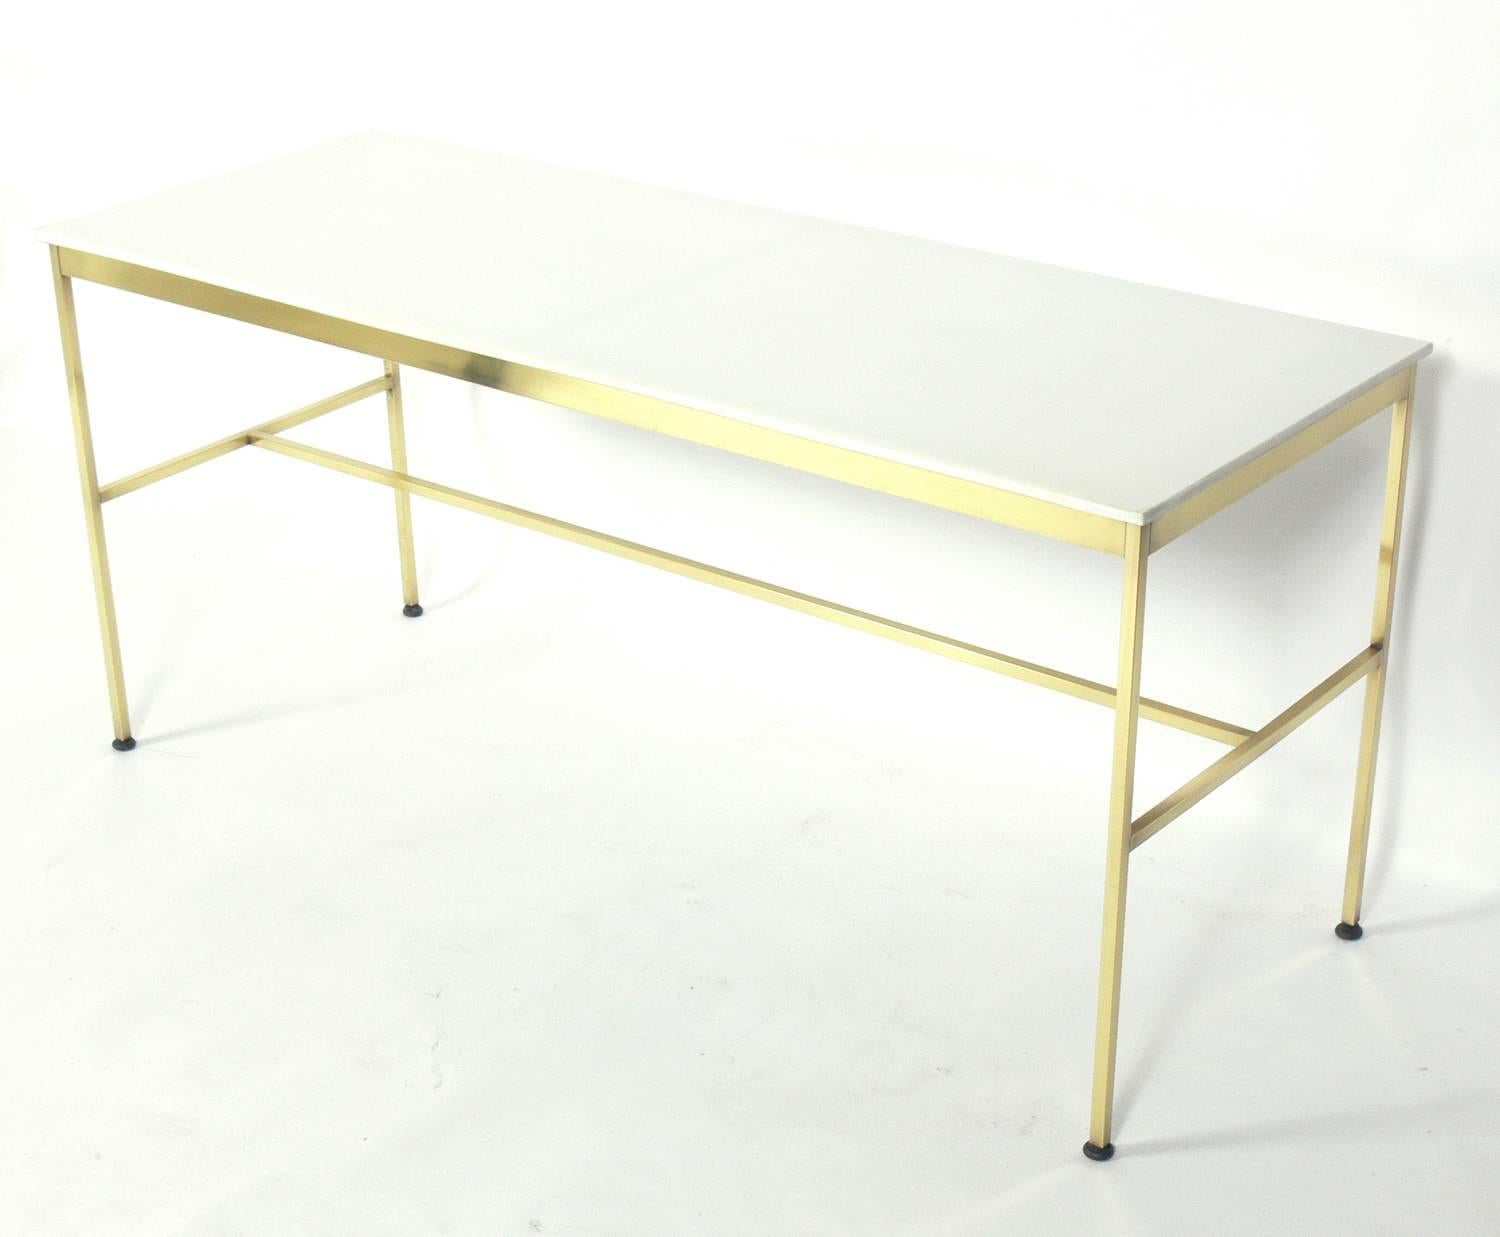 Modernist brass and milk glass console, designed by Paul McCobb, American, circa 1950s. This piece is a versatile size and can be used as a console table, sofa table, or bar. The brass has been hand polished and lacquered.